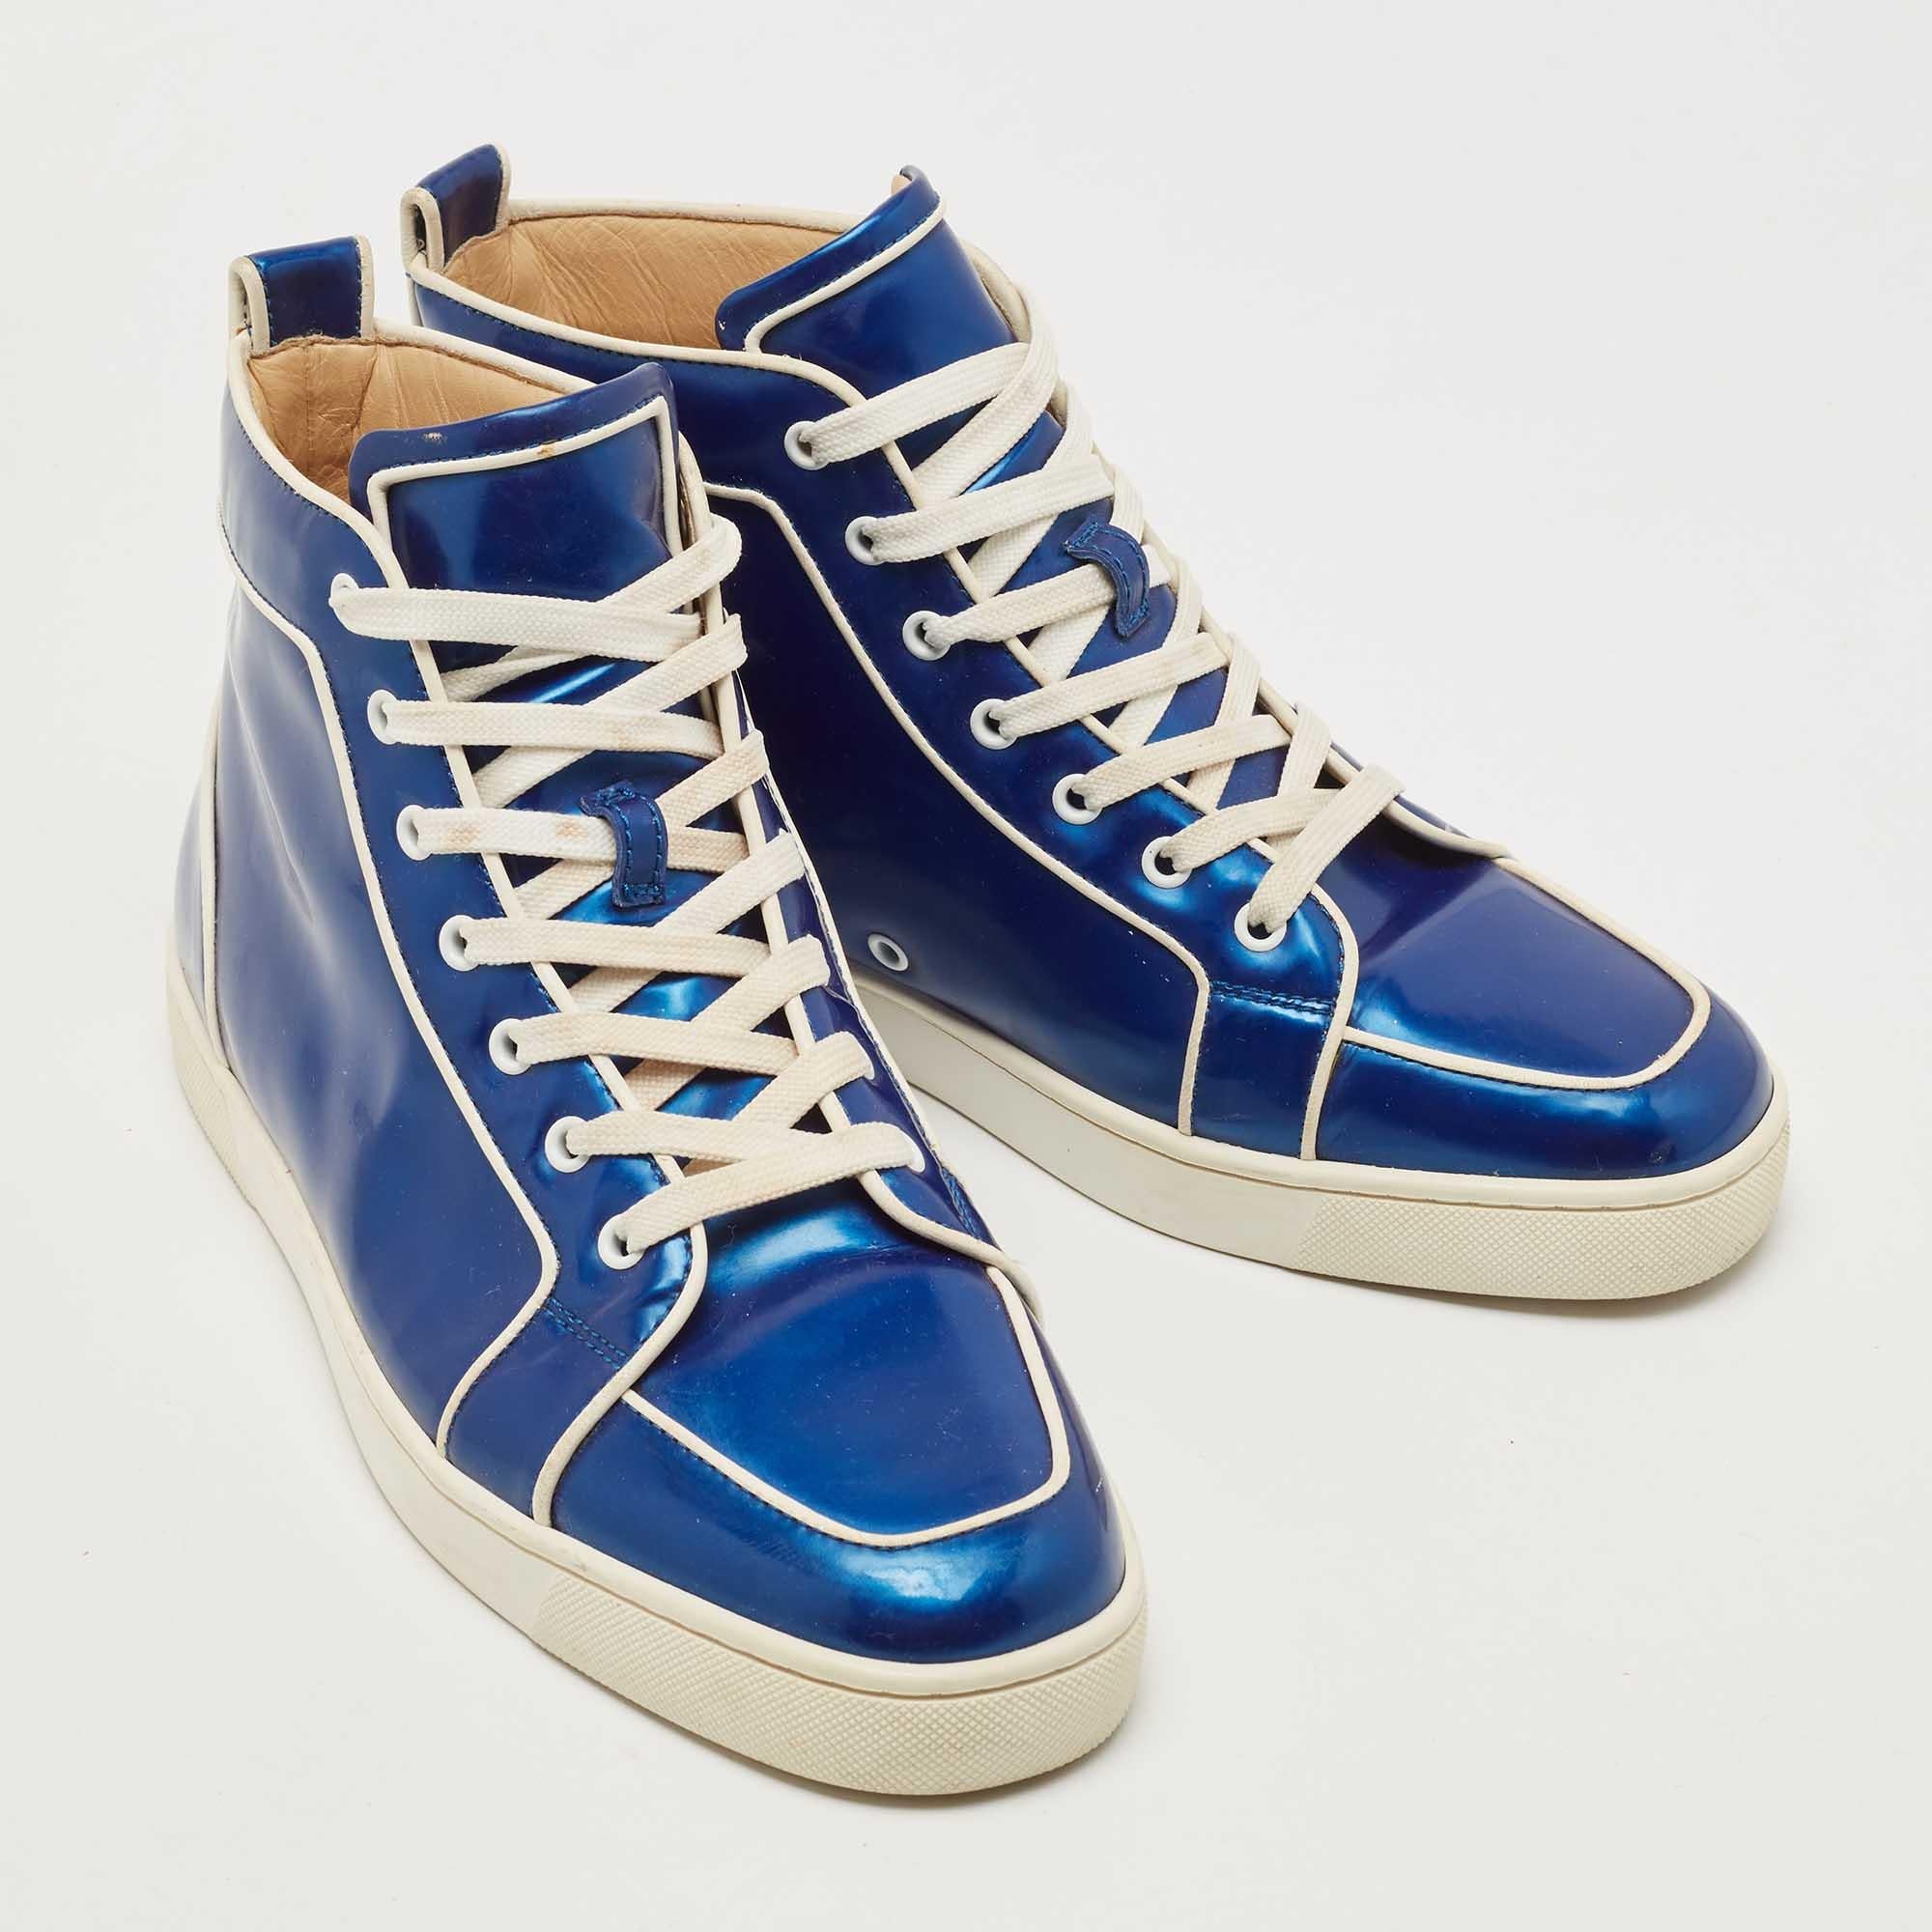 Christian Louboutin Blue Patent Leather Rantus Orlato High Top Sneakers Size 44 1